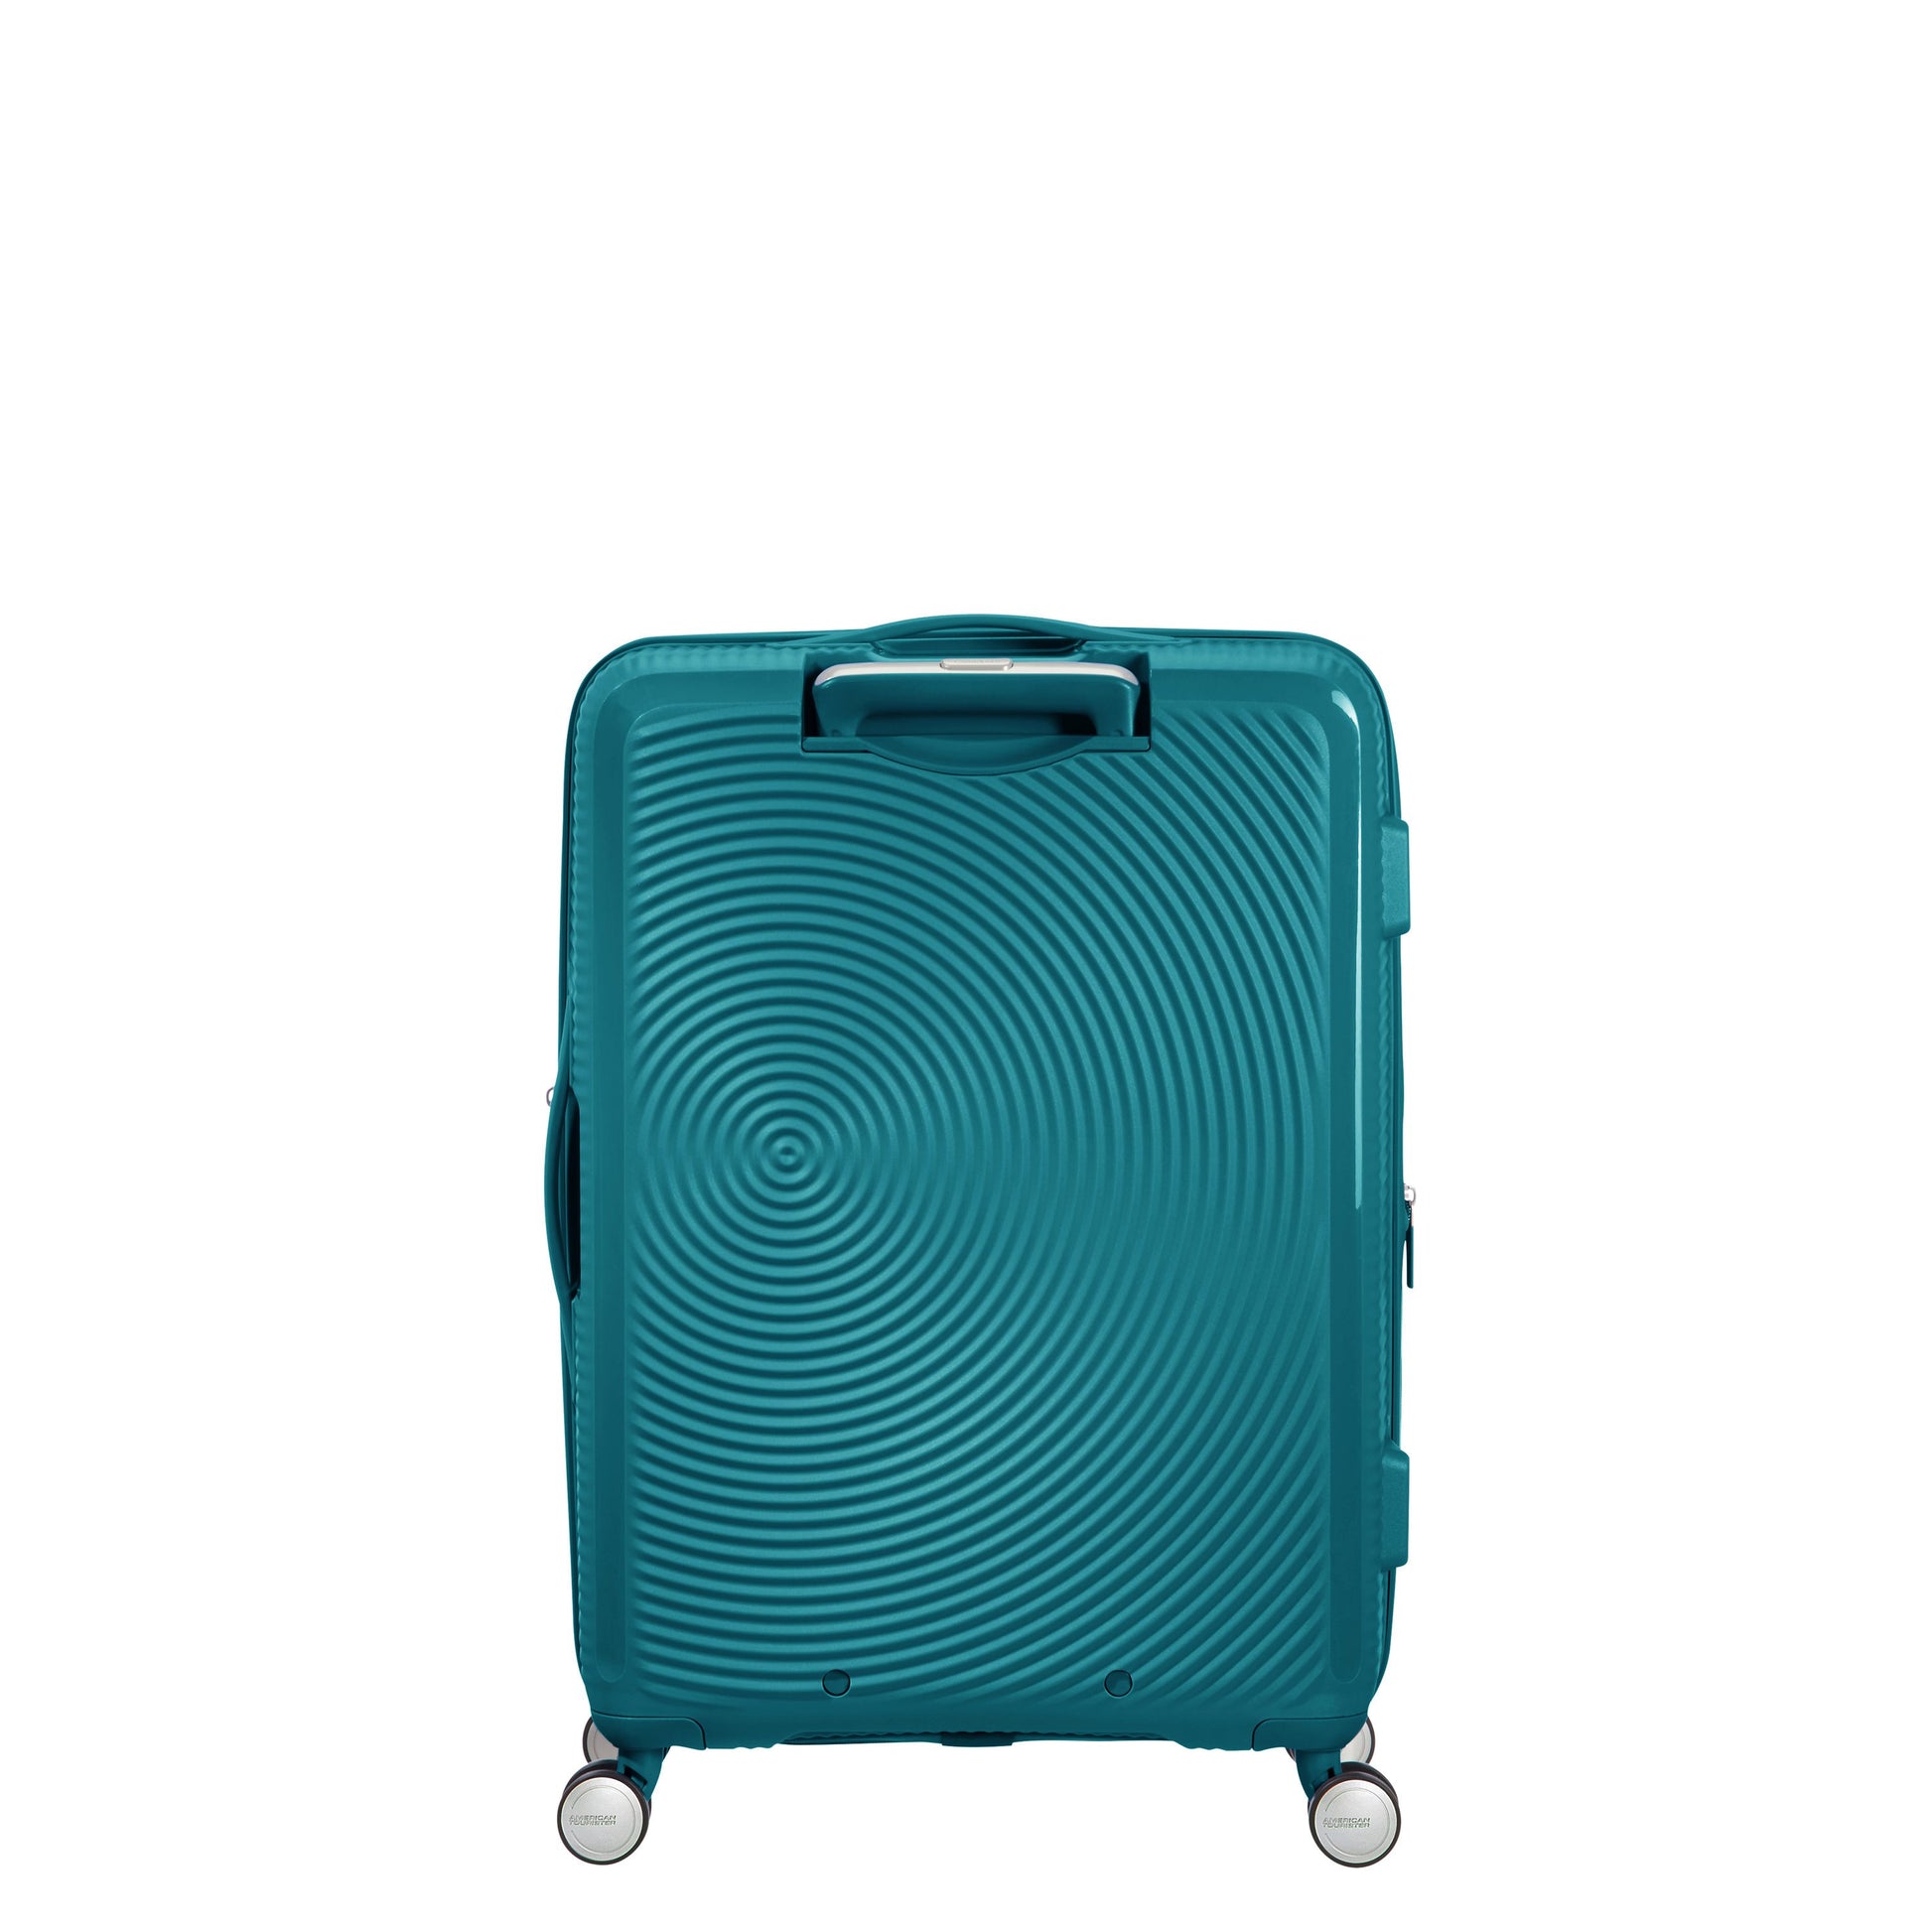 American Tourister Curio Spinner Medium Expandable Luggage